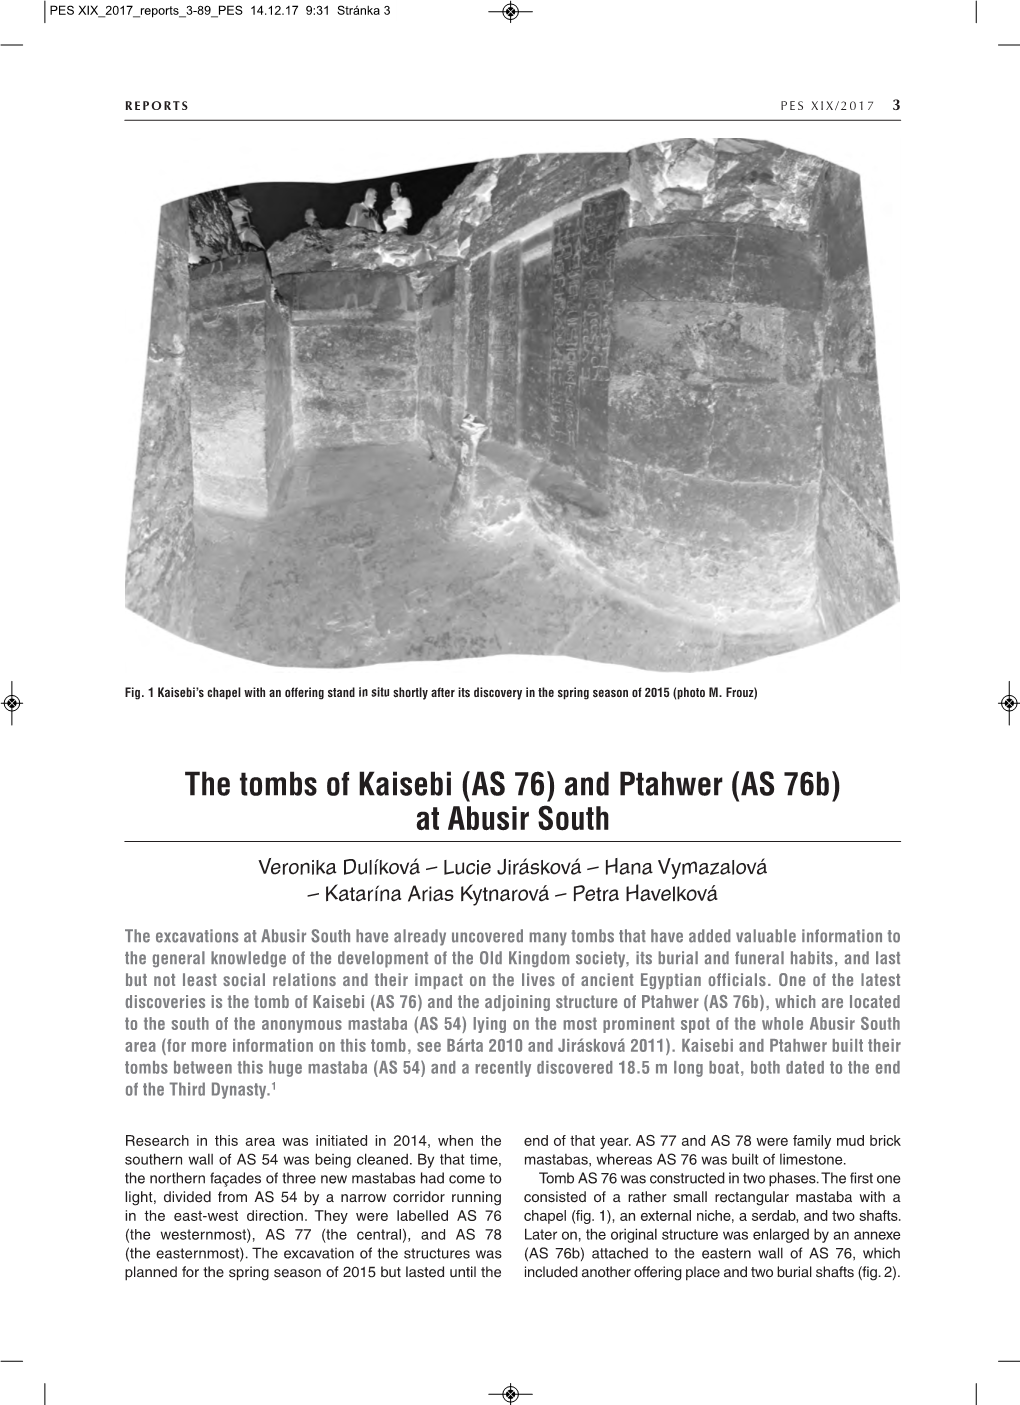 The Tombs of Kaisebi (AS 76) and Ptahwer (AS 76B) at Abusir South